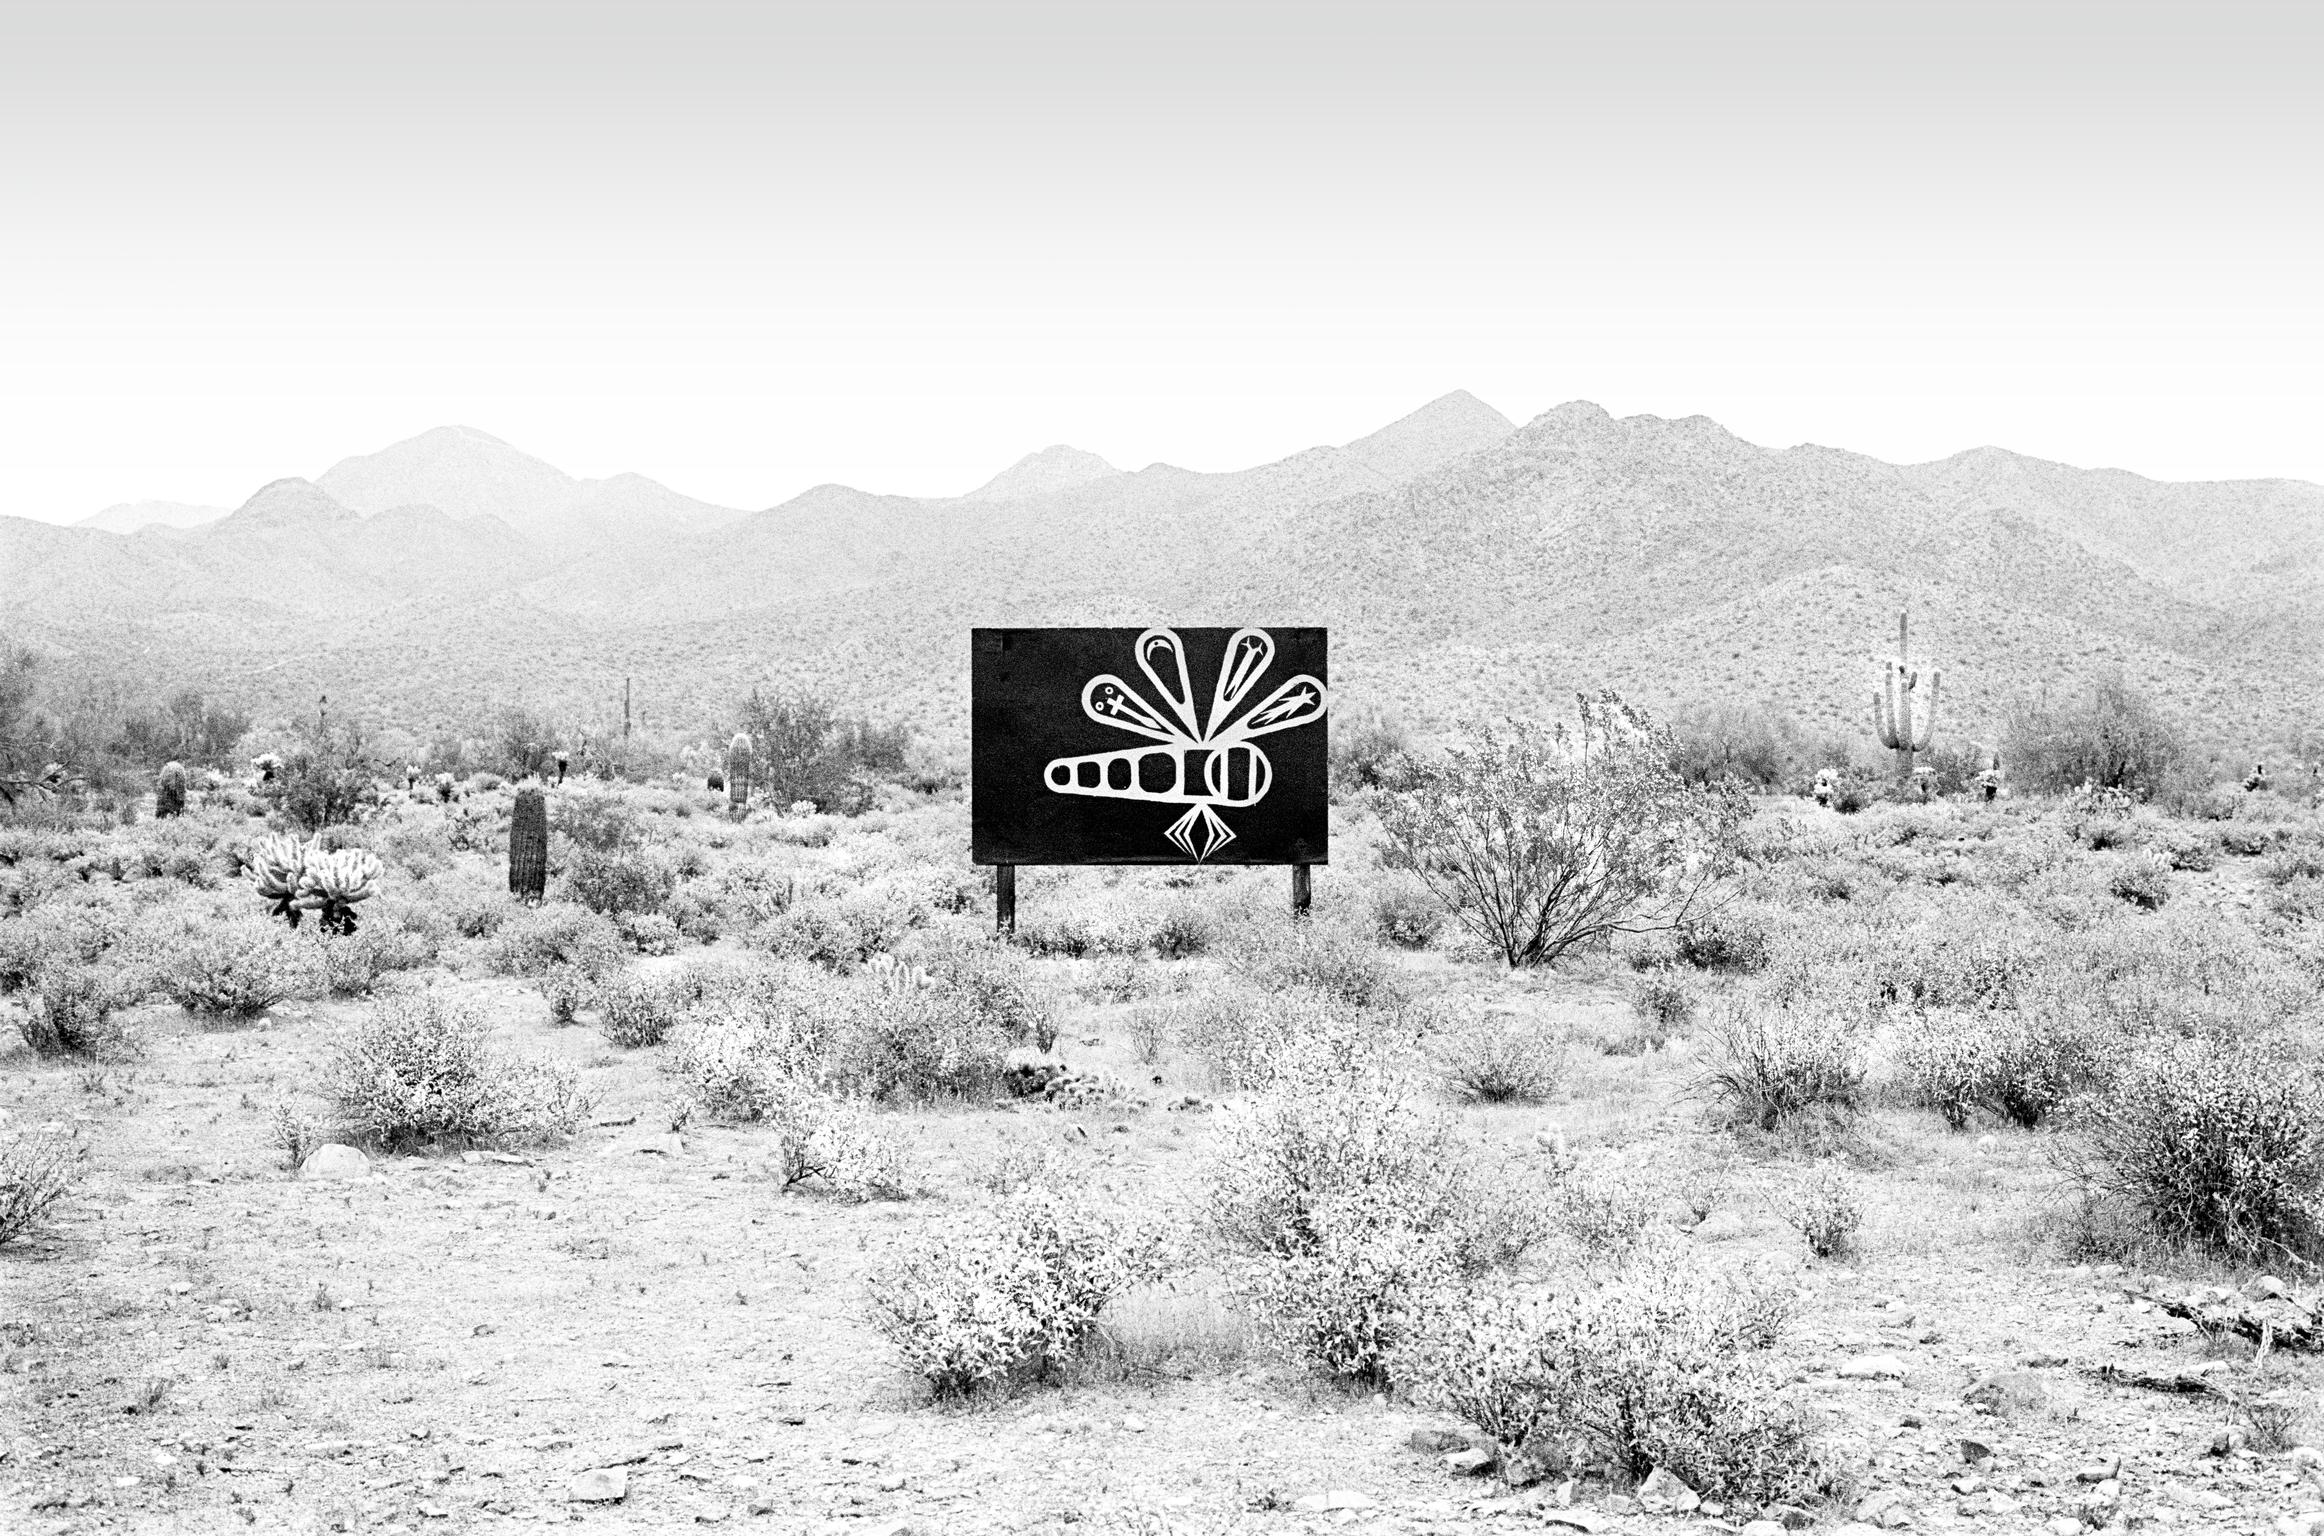 Driving east into the desert. Frequently in the desert are inventive signs suggesting wild life in the area. Phoenix, Arizona USA